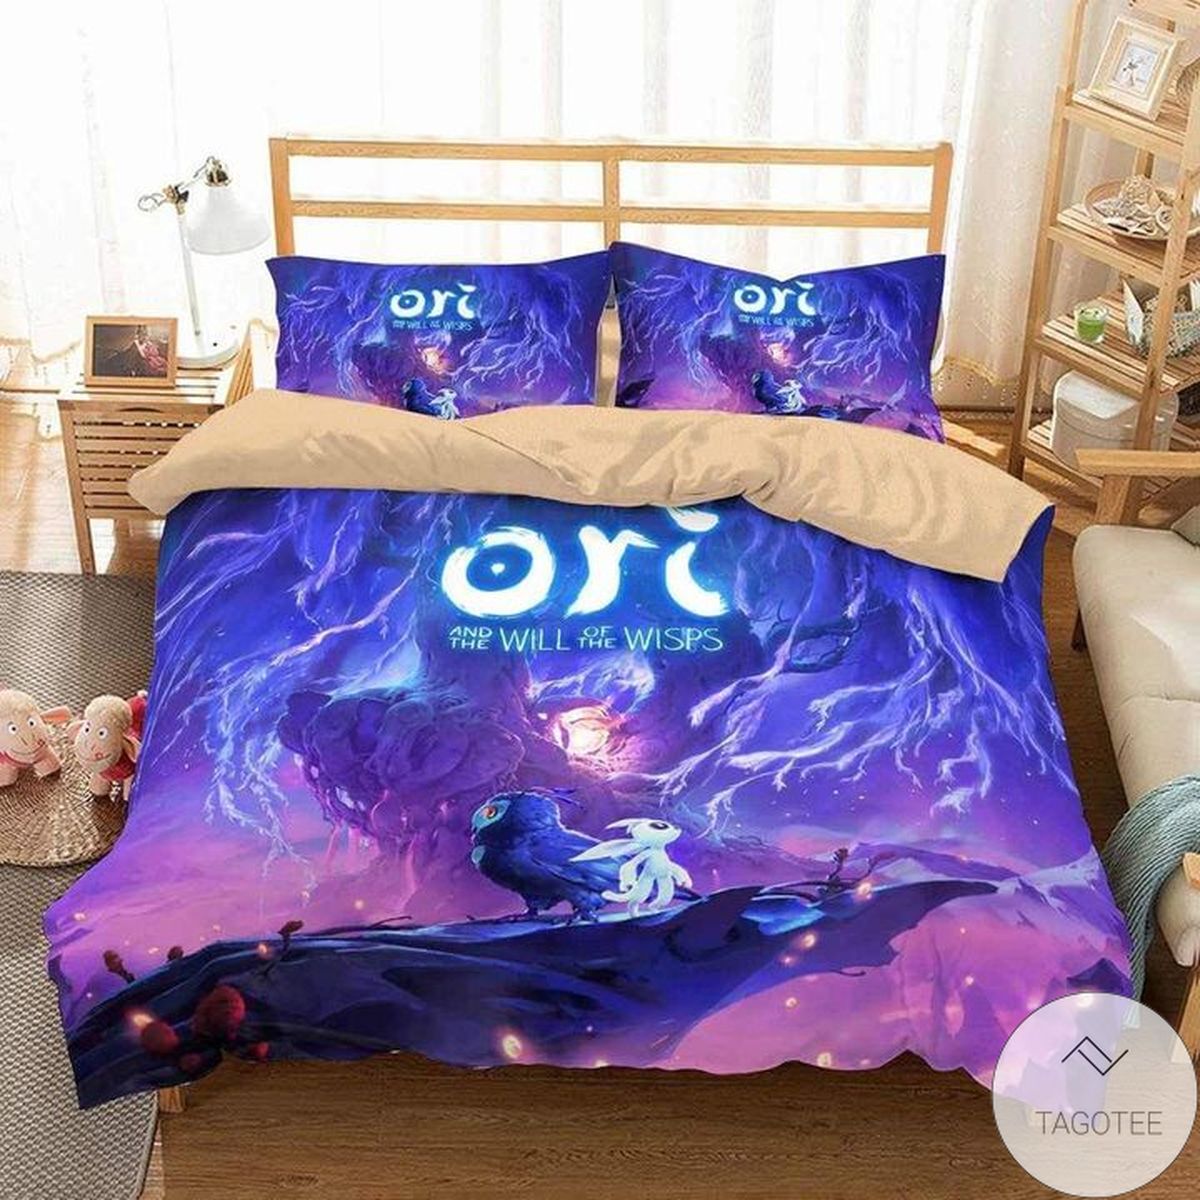 Ori And The Will Of The Wisps Bedding Set